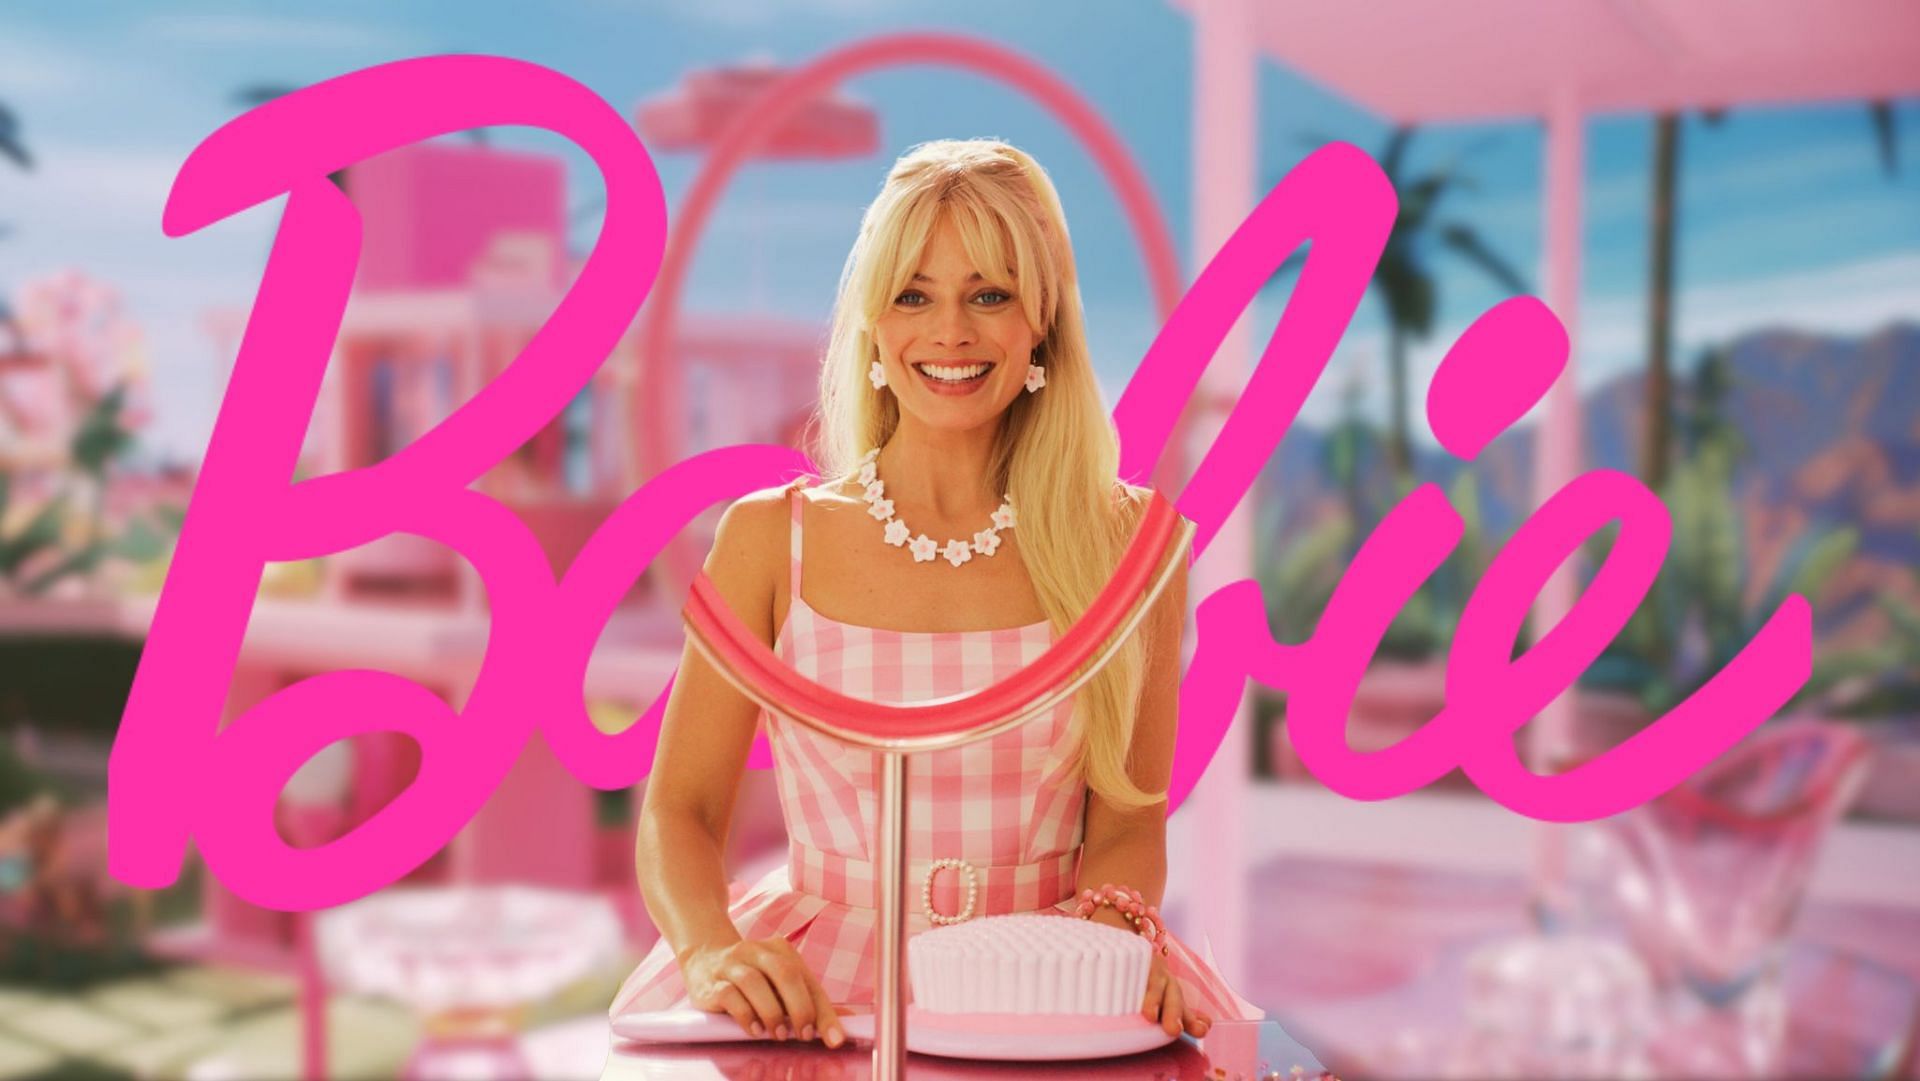 Unveiling the runtime for Margot Robbie's Barbie